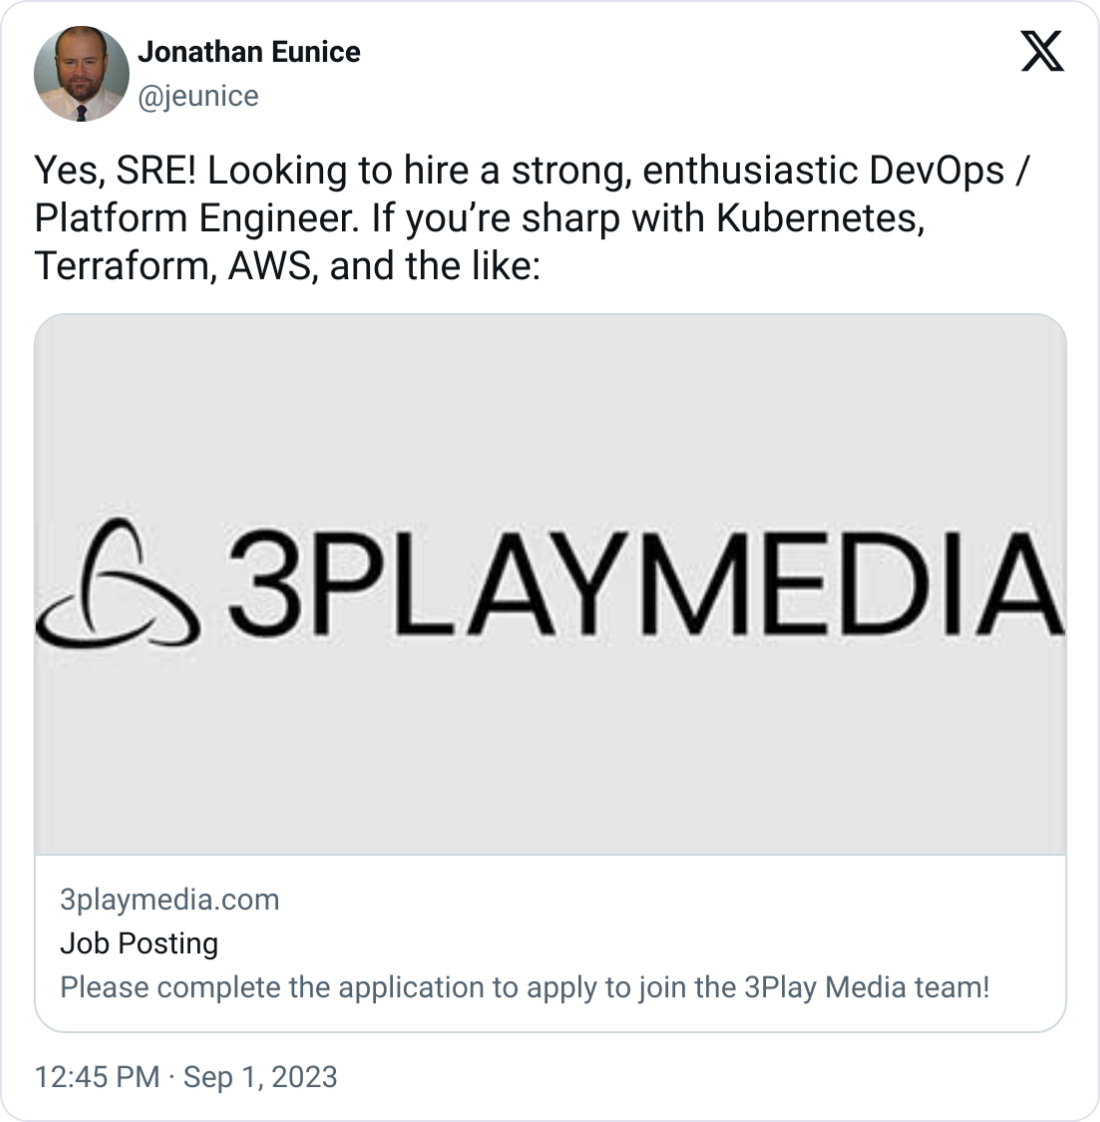  Jonathan Eunice @jeunice Yes, SRE! Looking to hire a strong, enthusiastic DevOps / Platform Engineer. If you’re sharp with Kubernetes, Terraform, AWS, and the like: